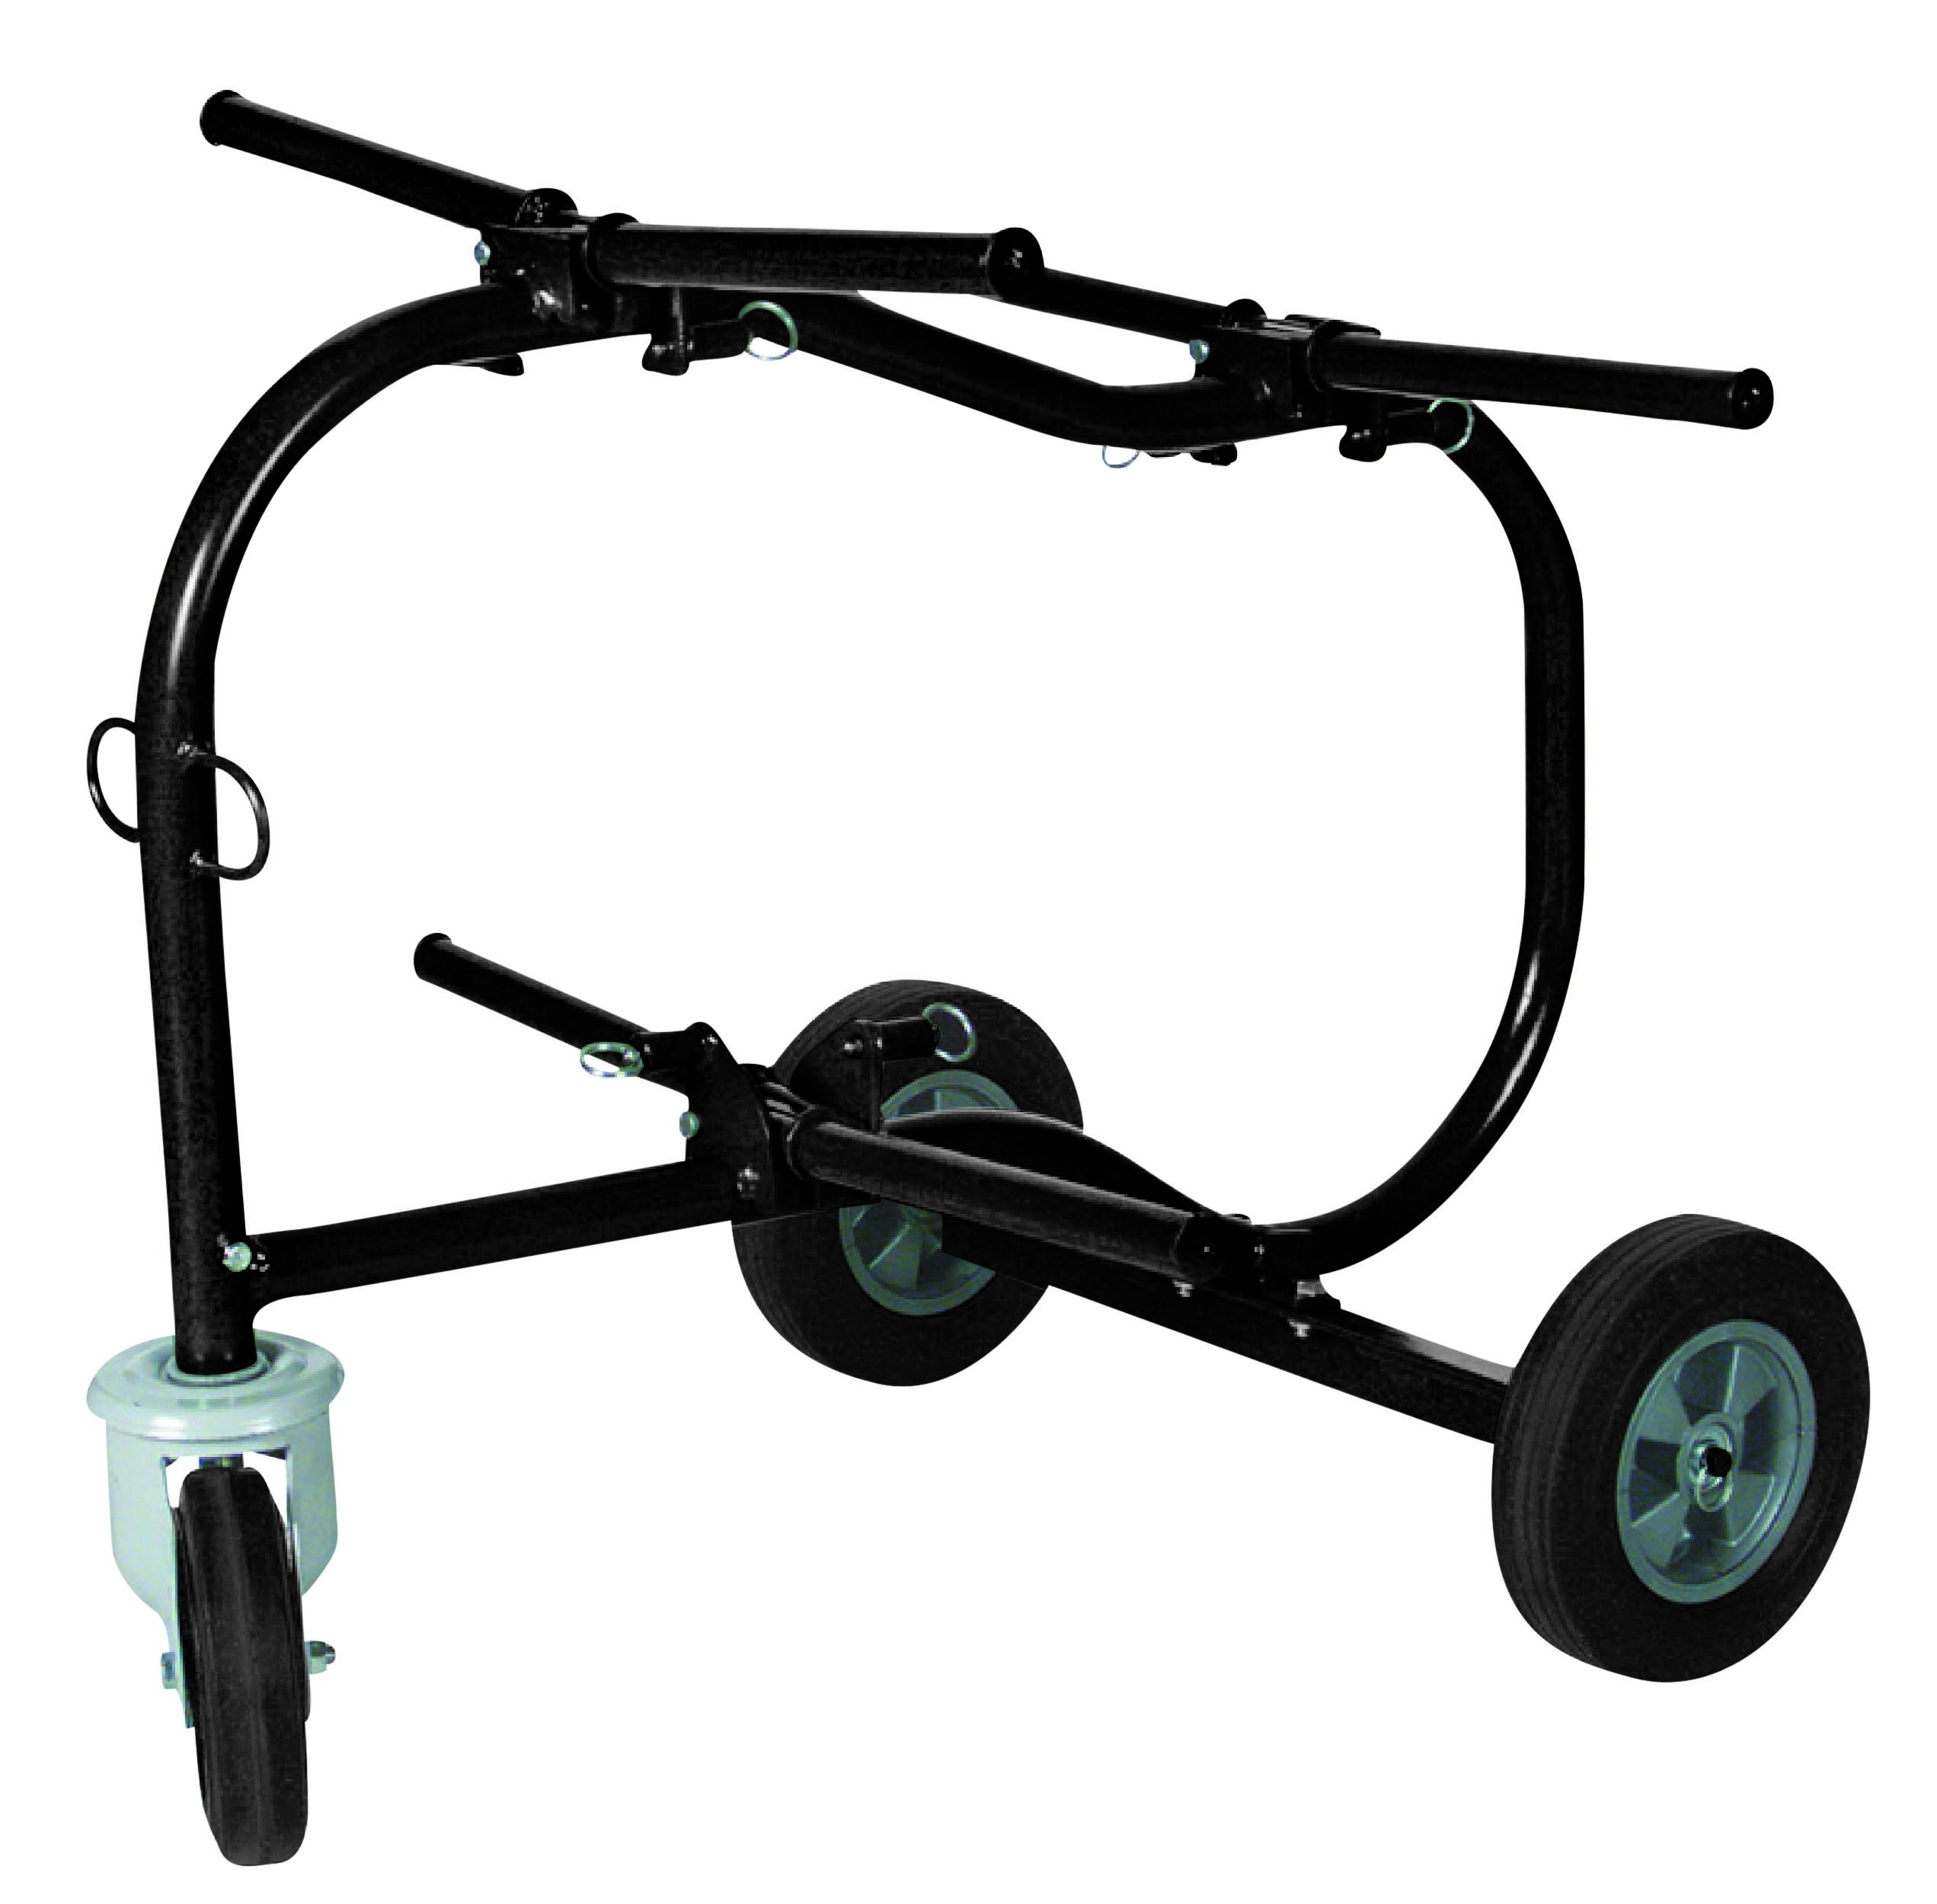 A Compact, Practical wire cart